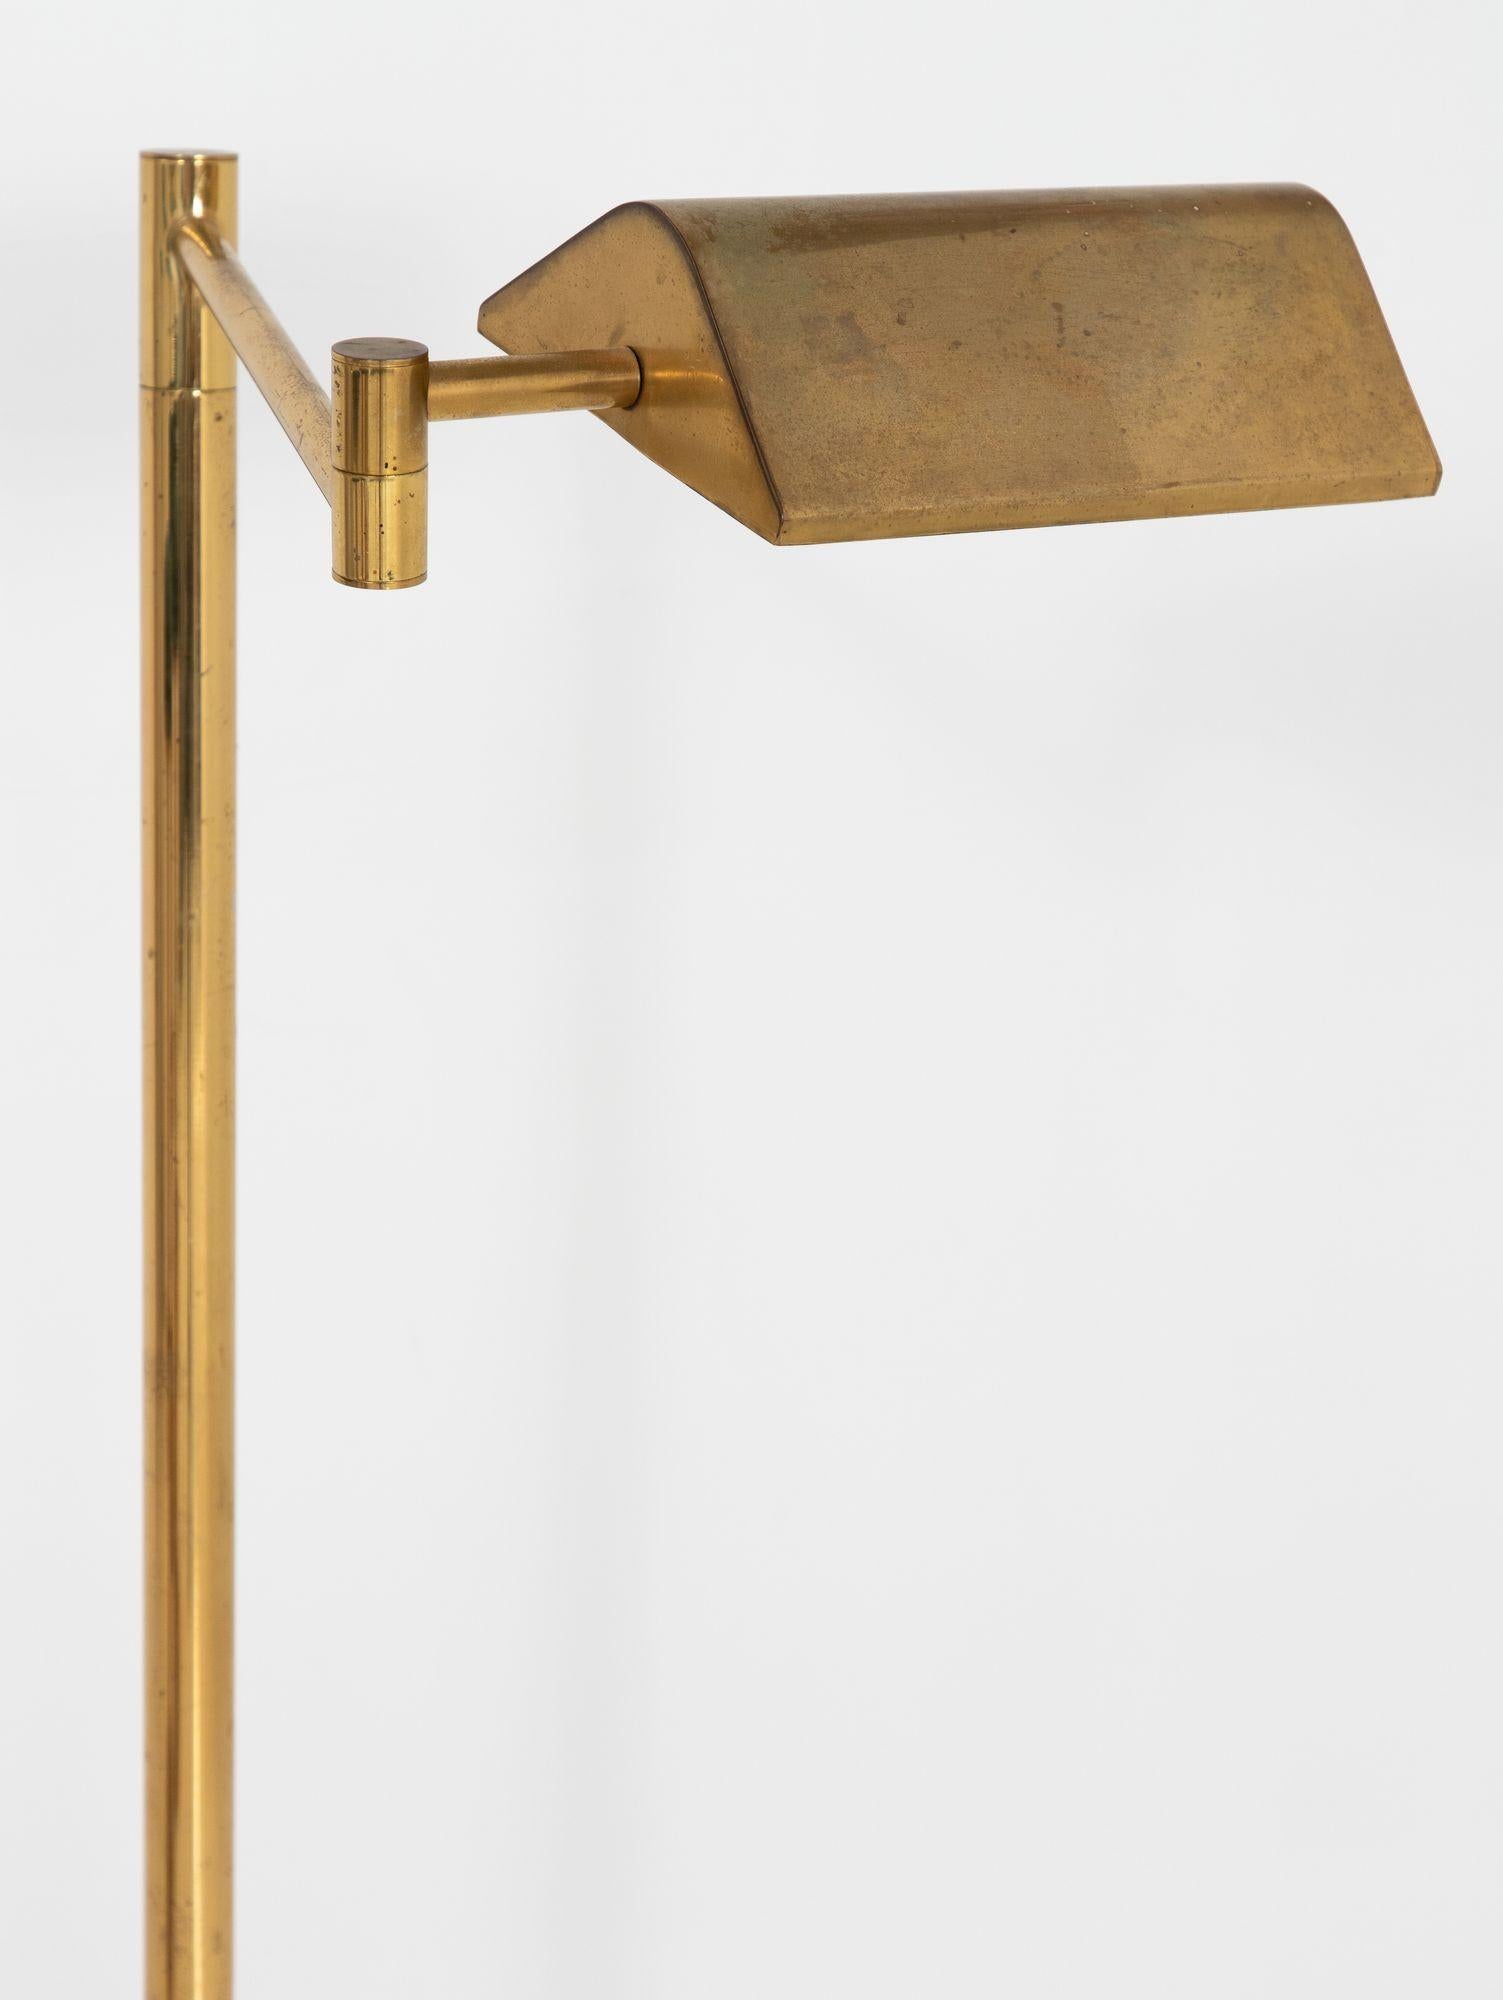 Vintage Brass Floor Lamp, France mid 20th Century For Sale 1